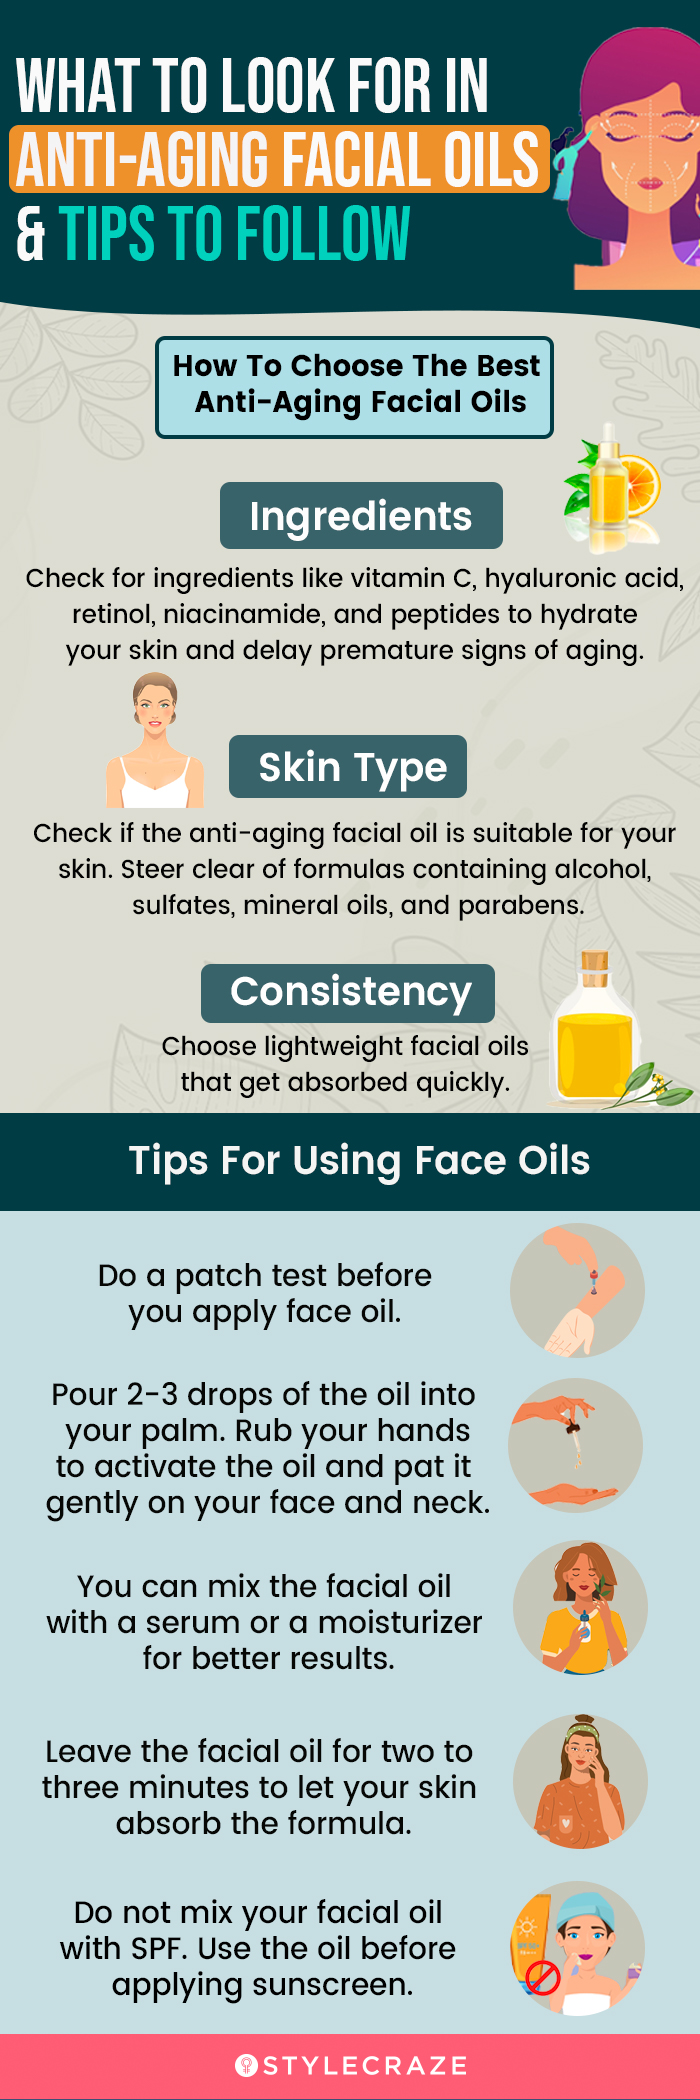 What To Look For In Anti-Aging Facial Oils [infographic]